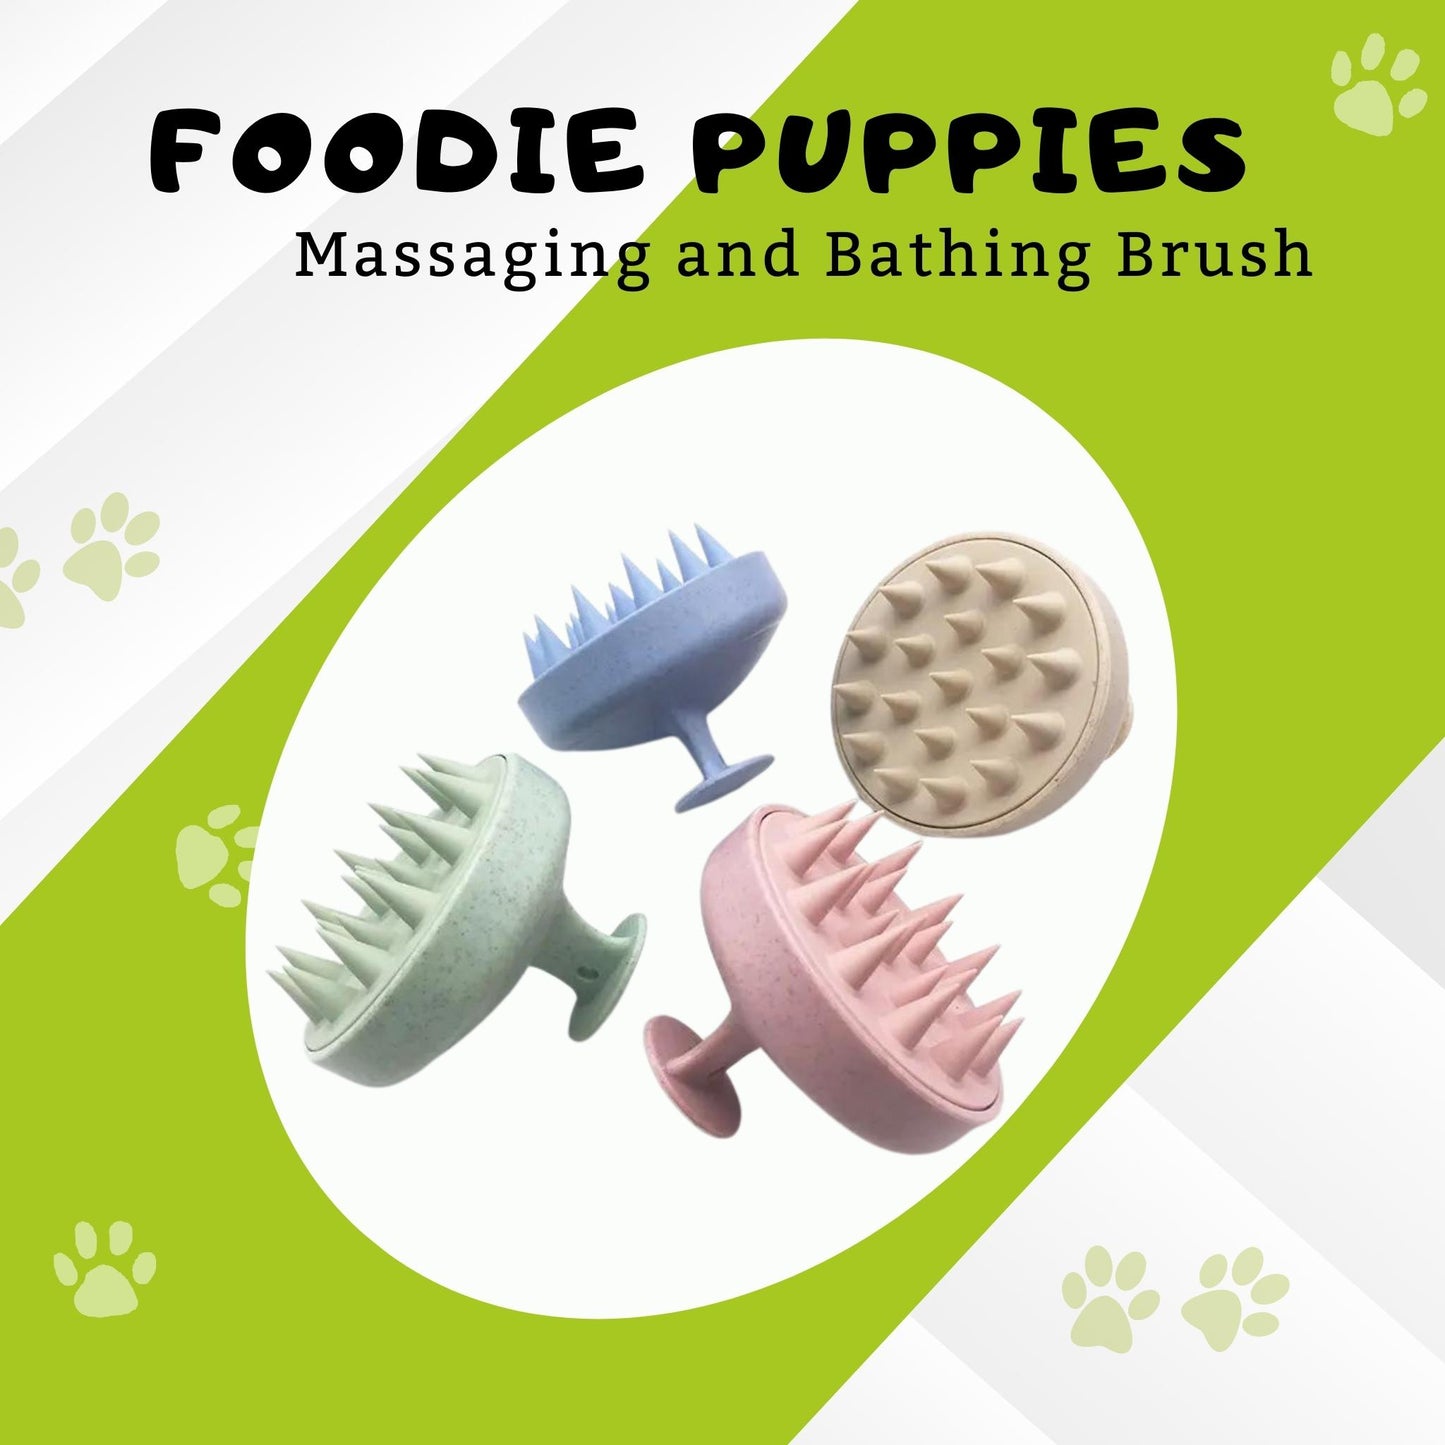 Foodie Puppies 2in1 Bathing & Massaging Silicone Brush for Dogs & Cats